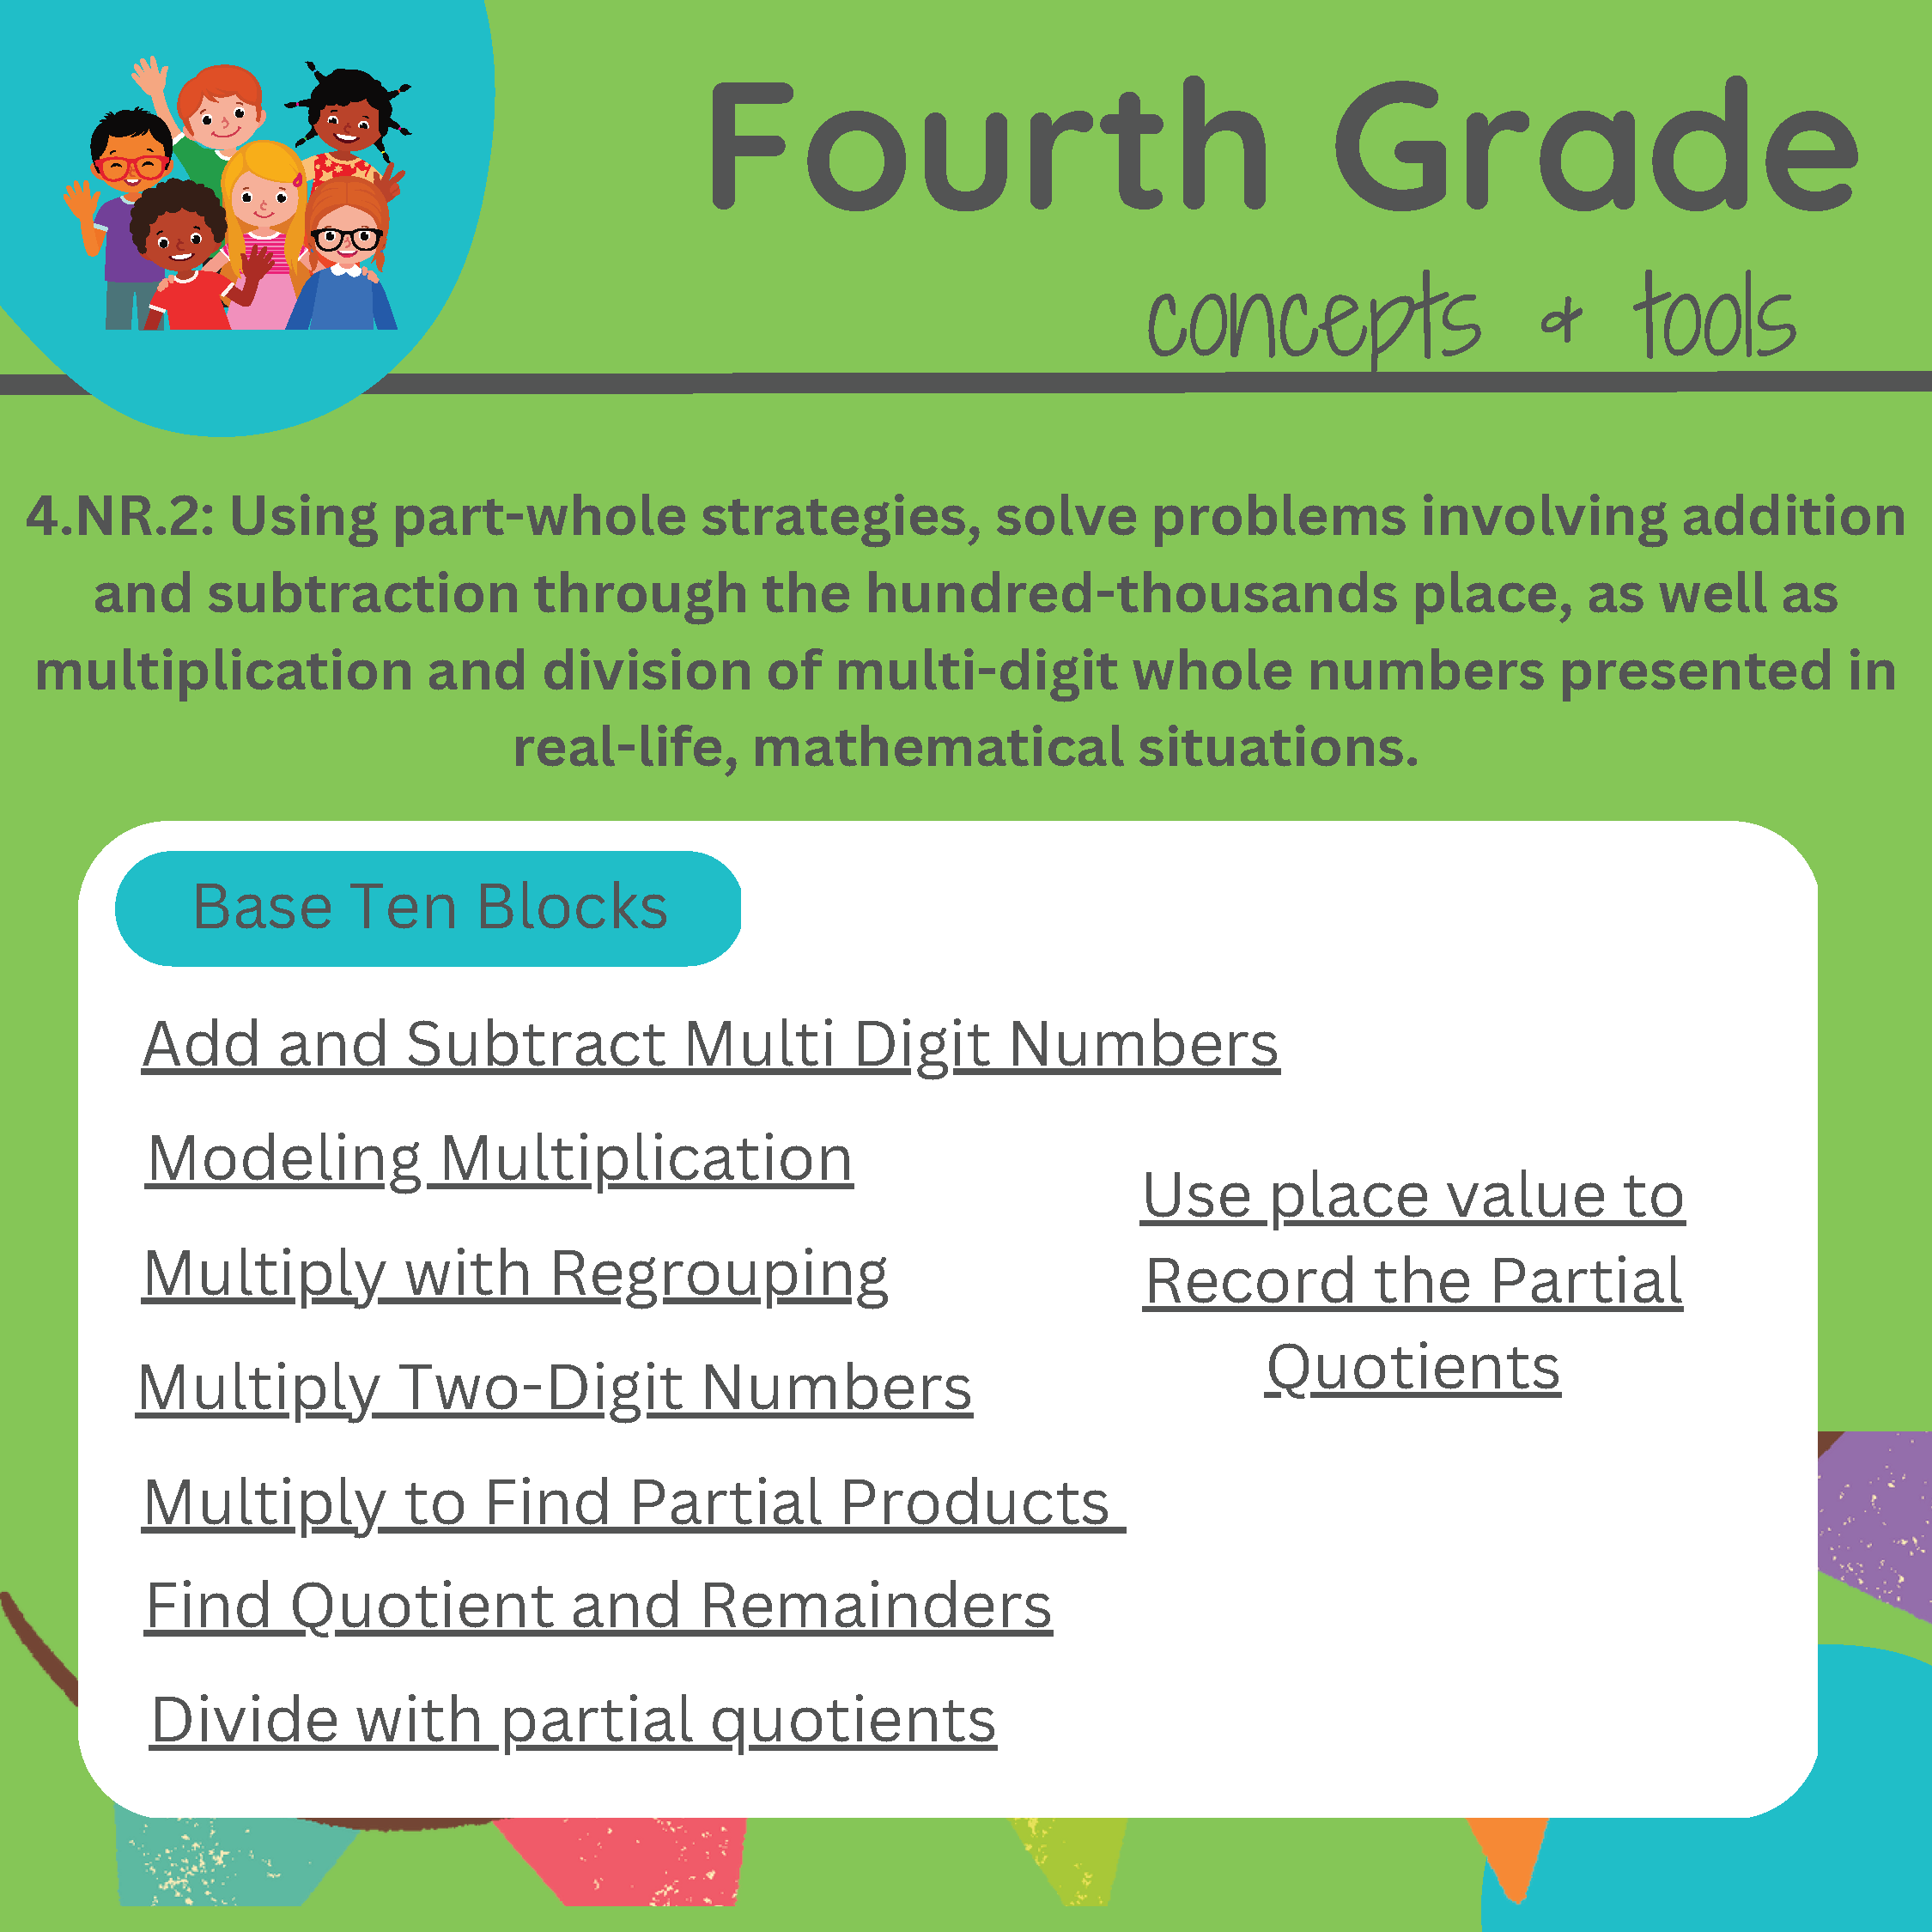 Fourth Grade concepts and tools_Page_1